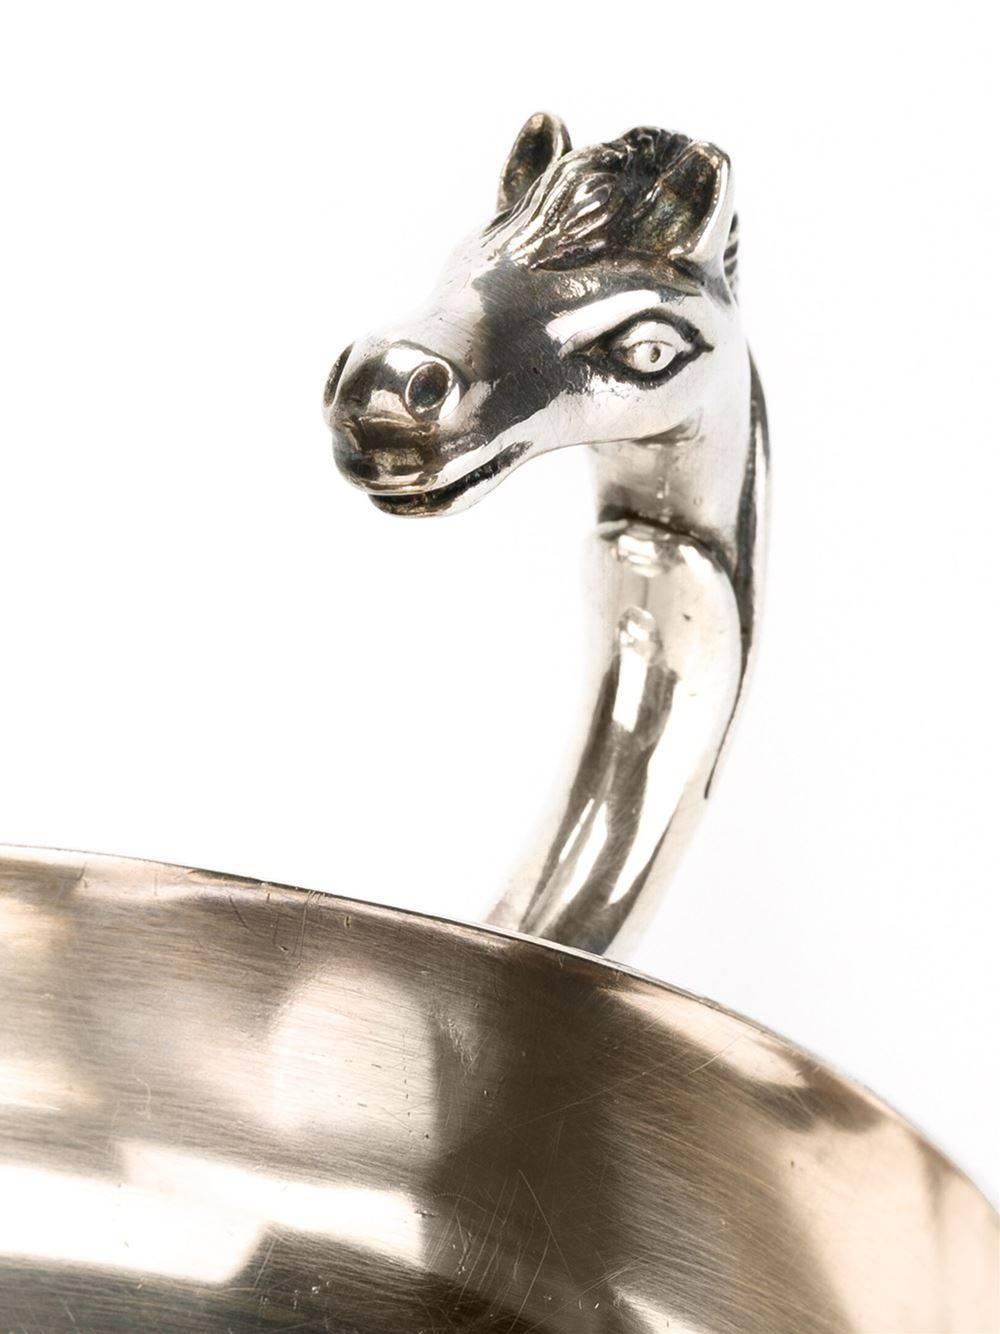 Hermès vintage horse vide-poche, circa 1960. Silver plated metal. Marked: Hermès Paris. Size: Diameter: 14 cm - 5.5 in. Height up-to the horse head: 7 cm - 2 3/4 in.